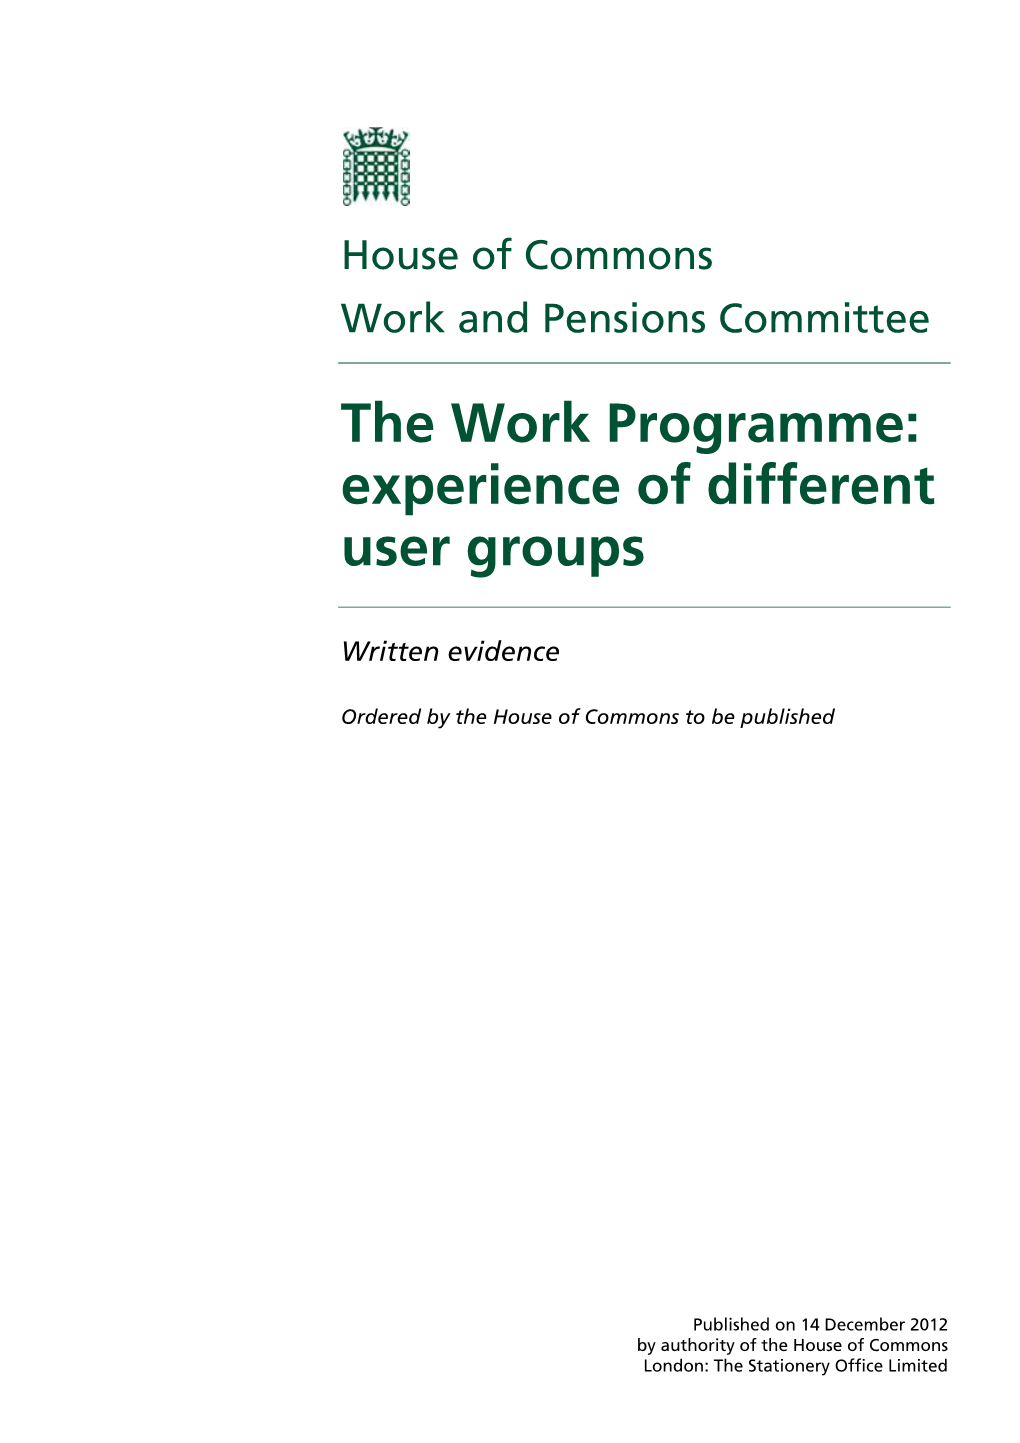 The Work Programme: Experience of Different User Groups